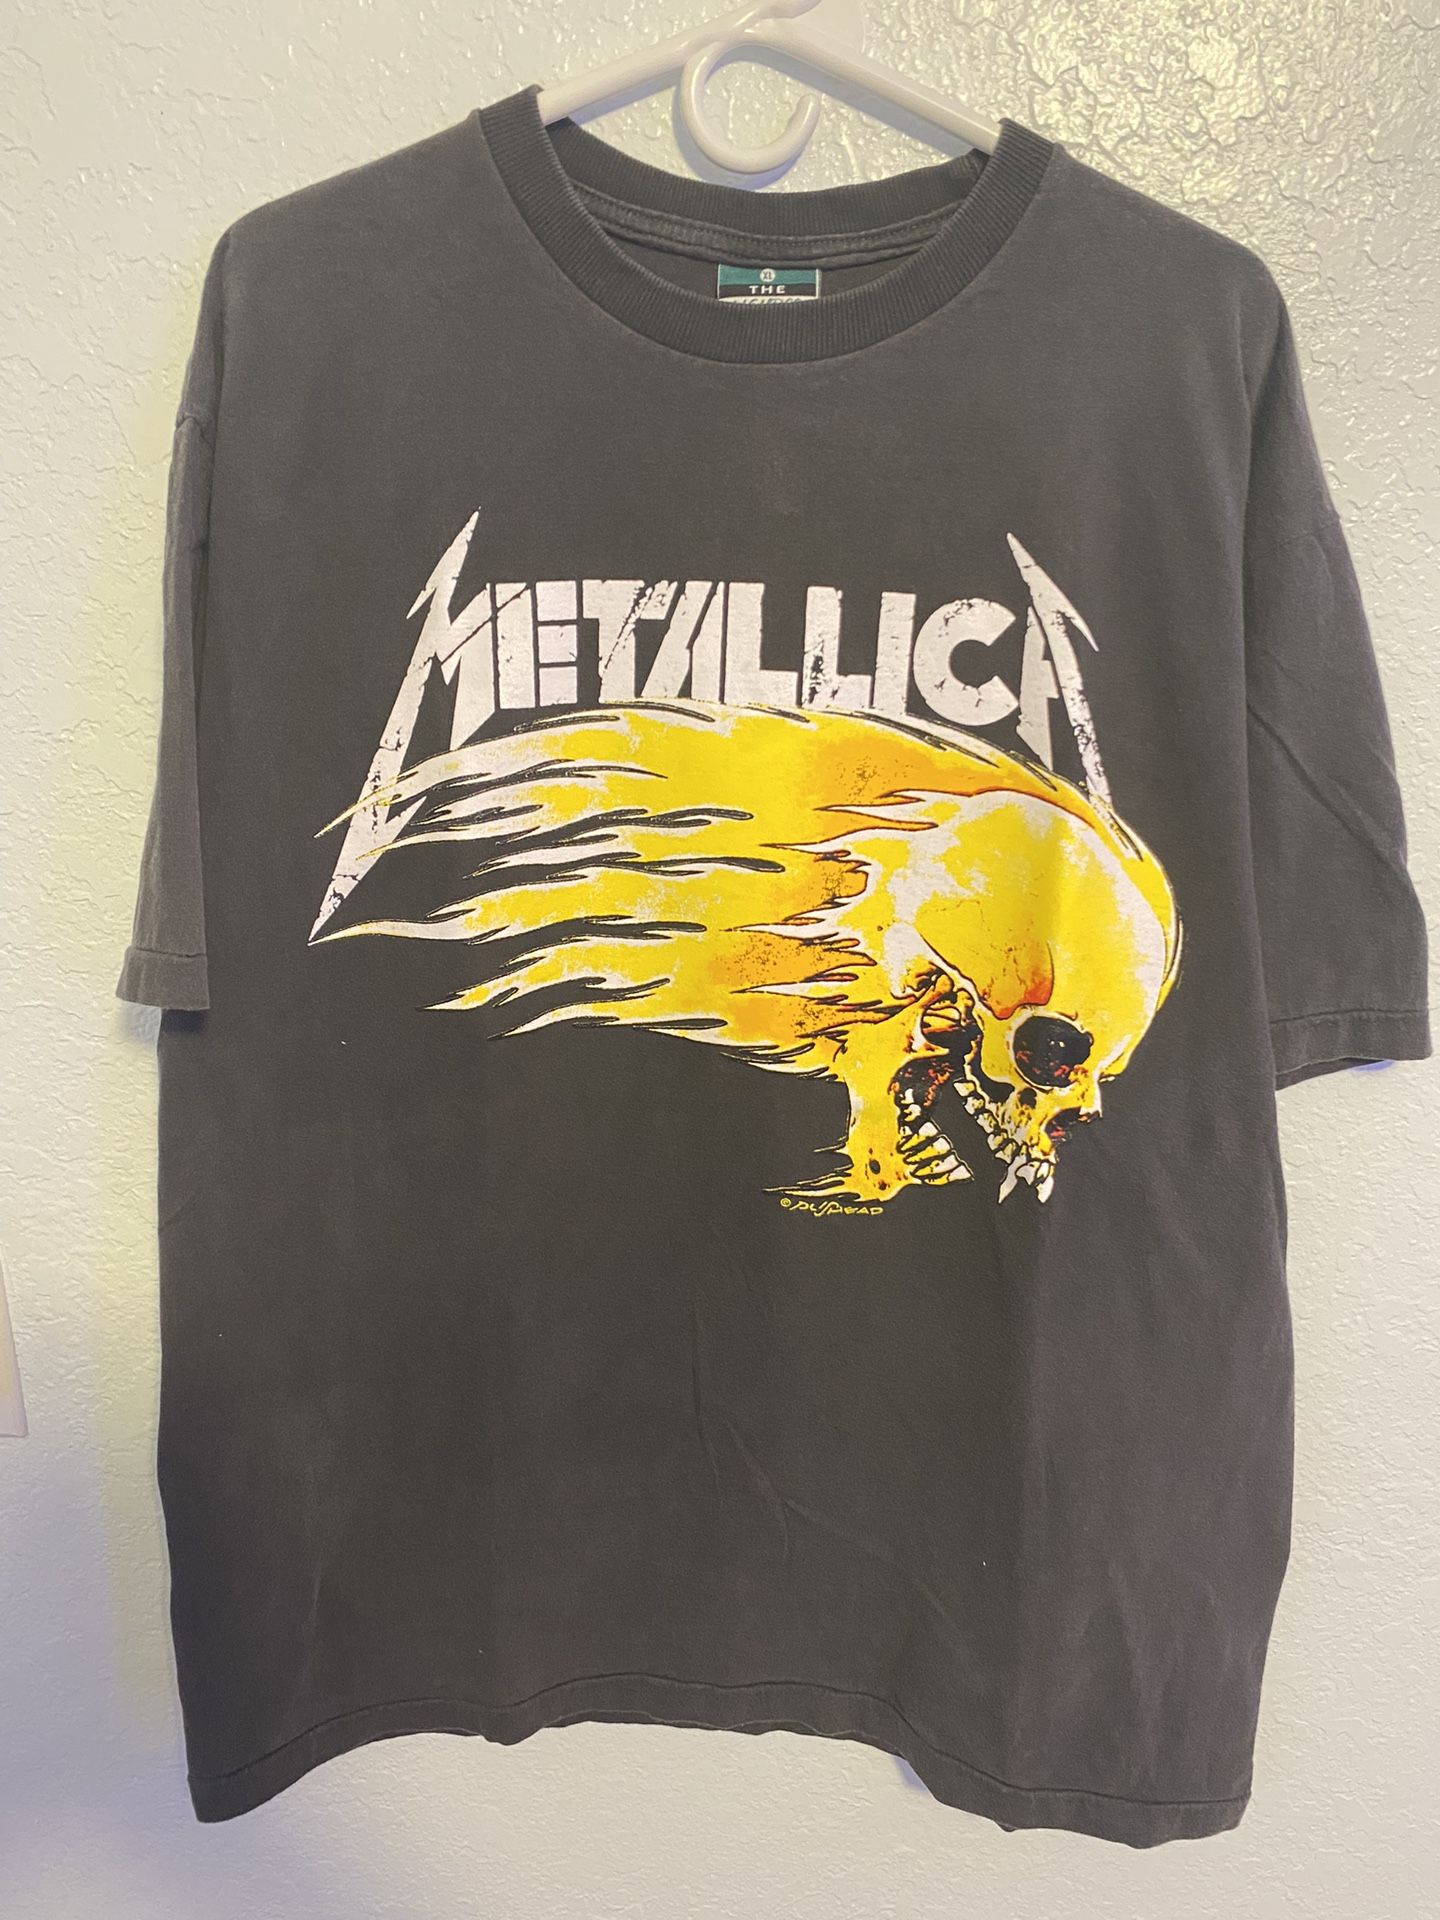 Vintage Metallica AOP All over print single stitch reprint graphic tee size X-Large 